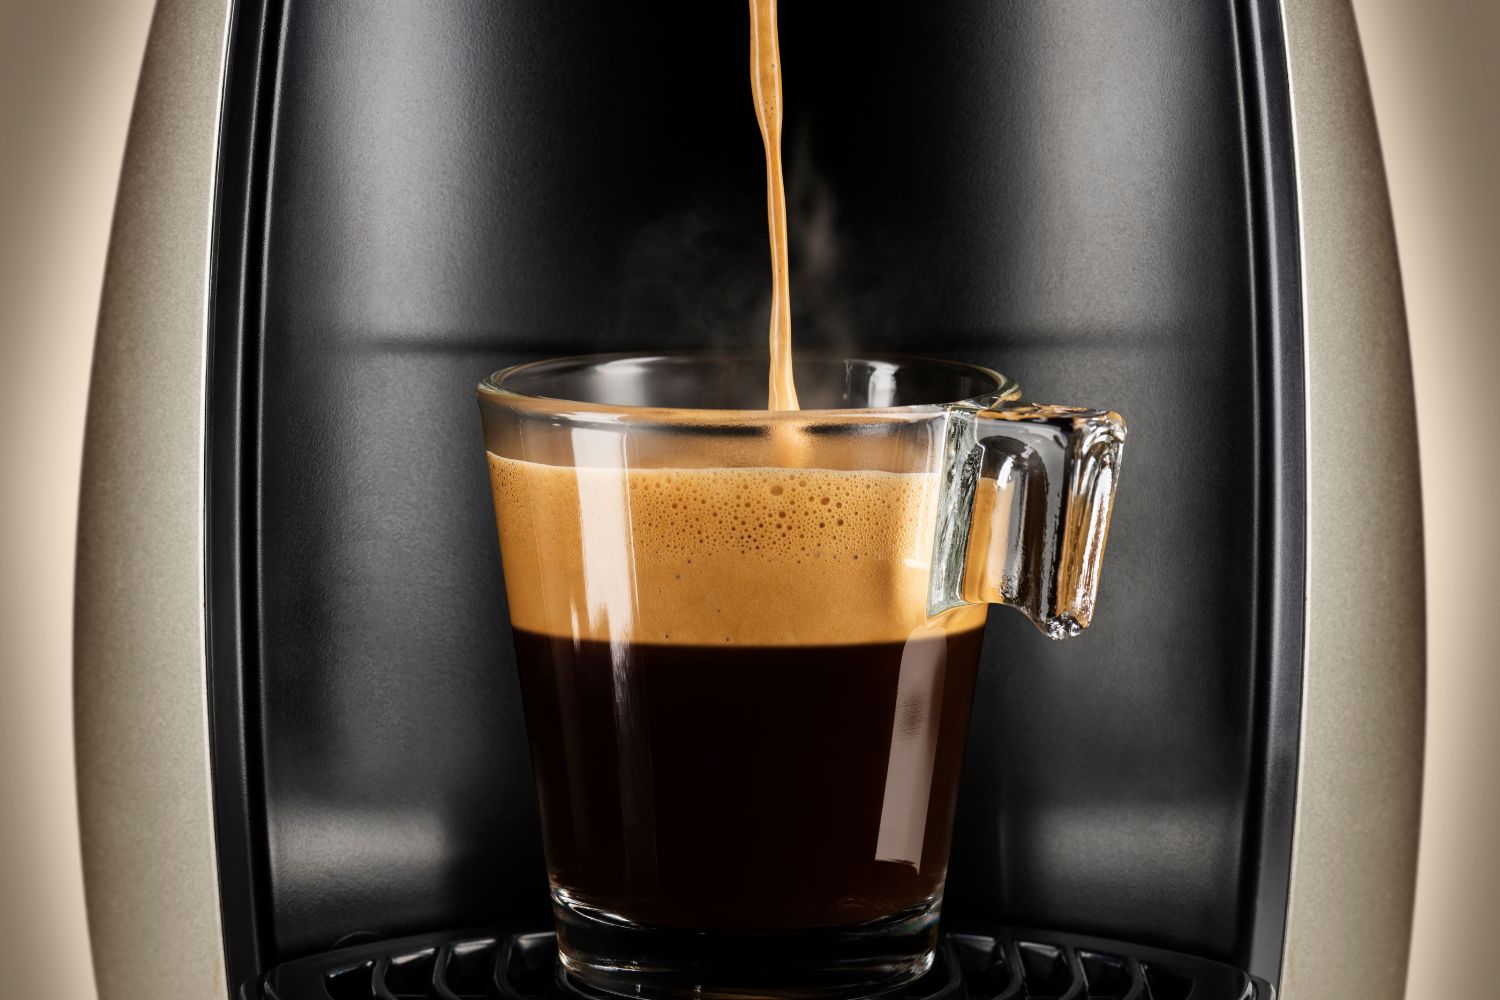 Coffee Maker Machine: Flavored-coffee for a good business